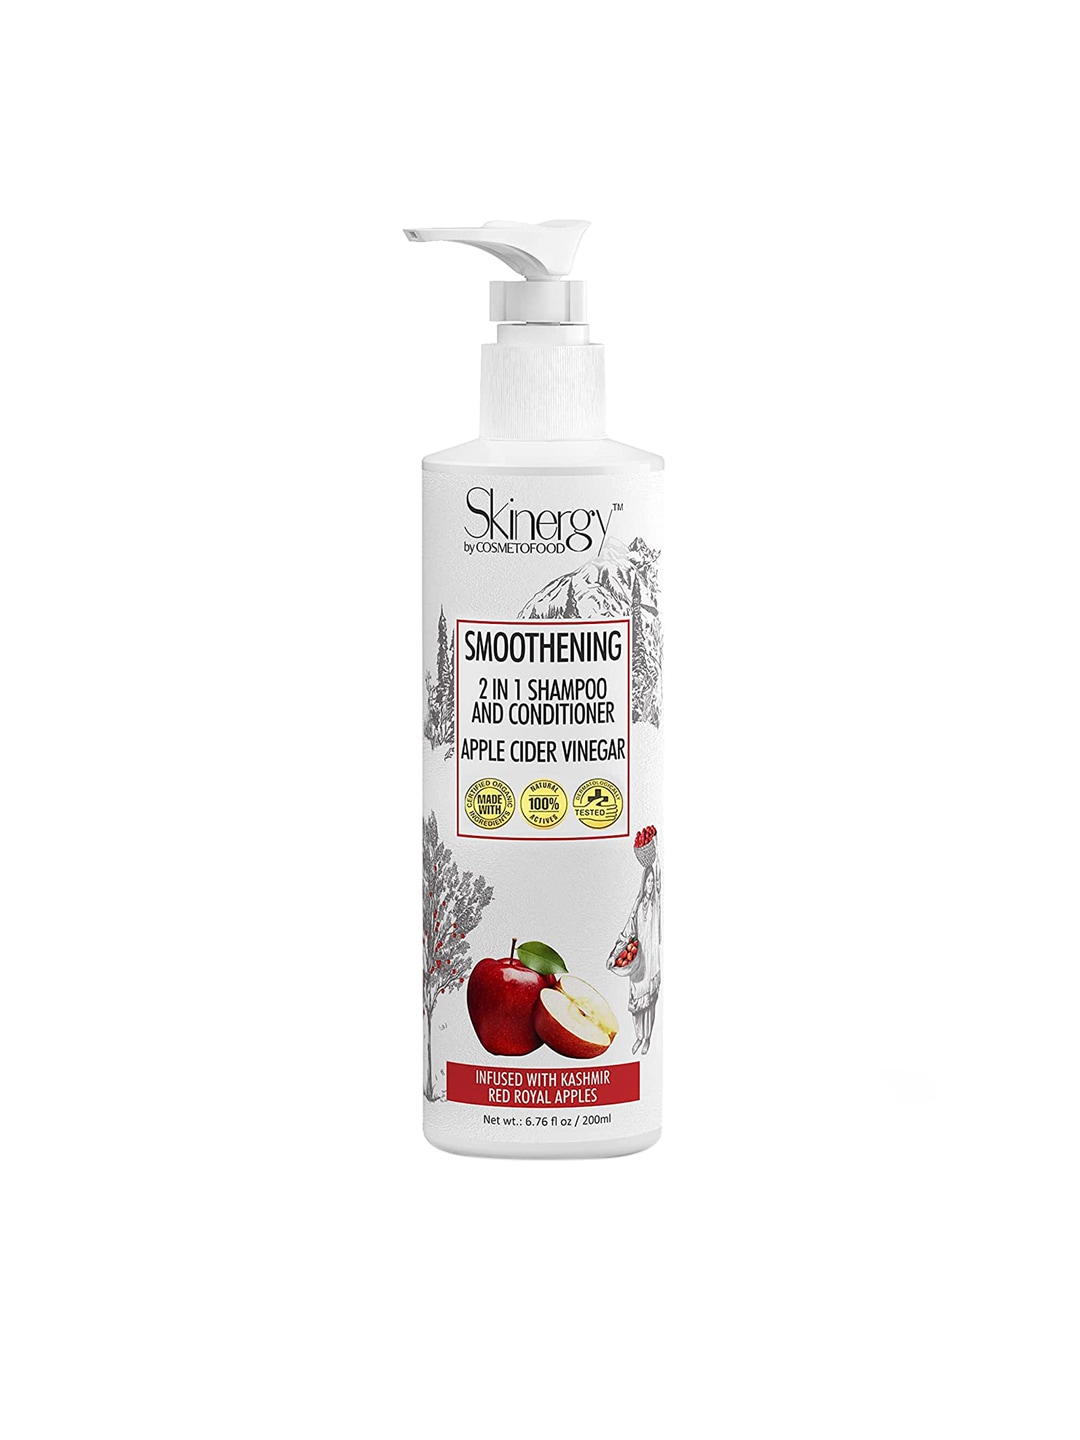 COSMETOFOOD Skinergy Smoothening 2 In 1 Shampoo & Conditioner Apple Cider Vinegar 200ml Price in India